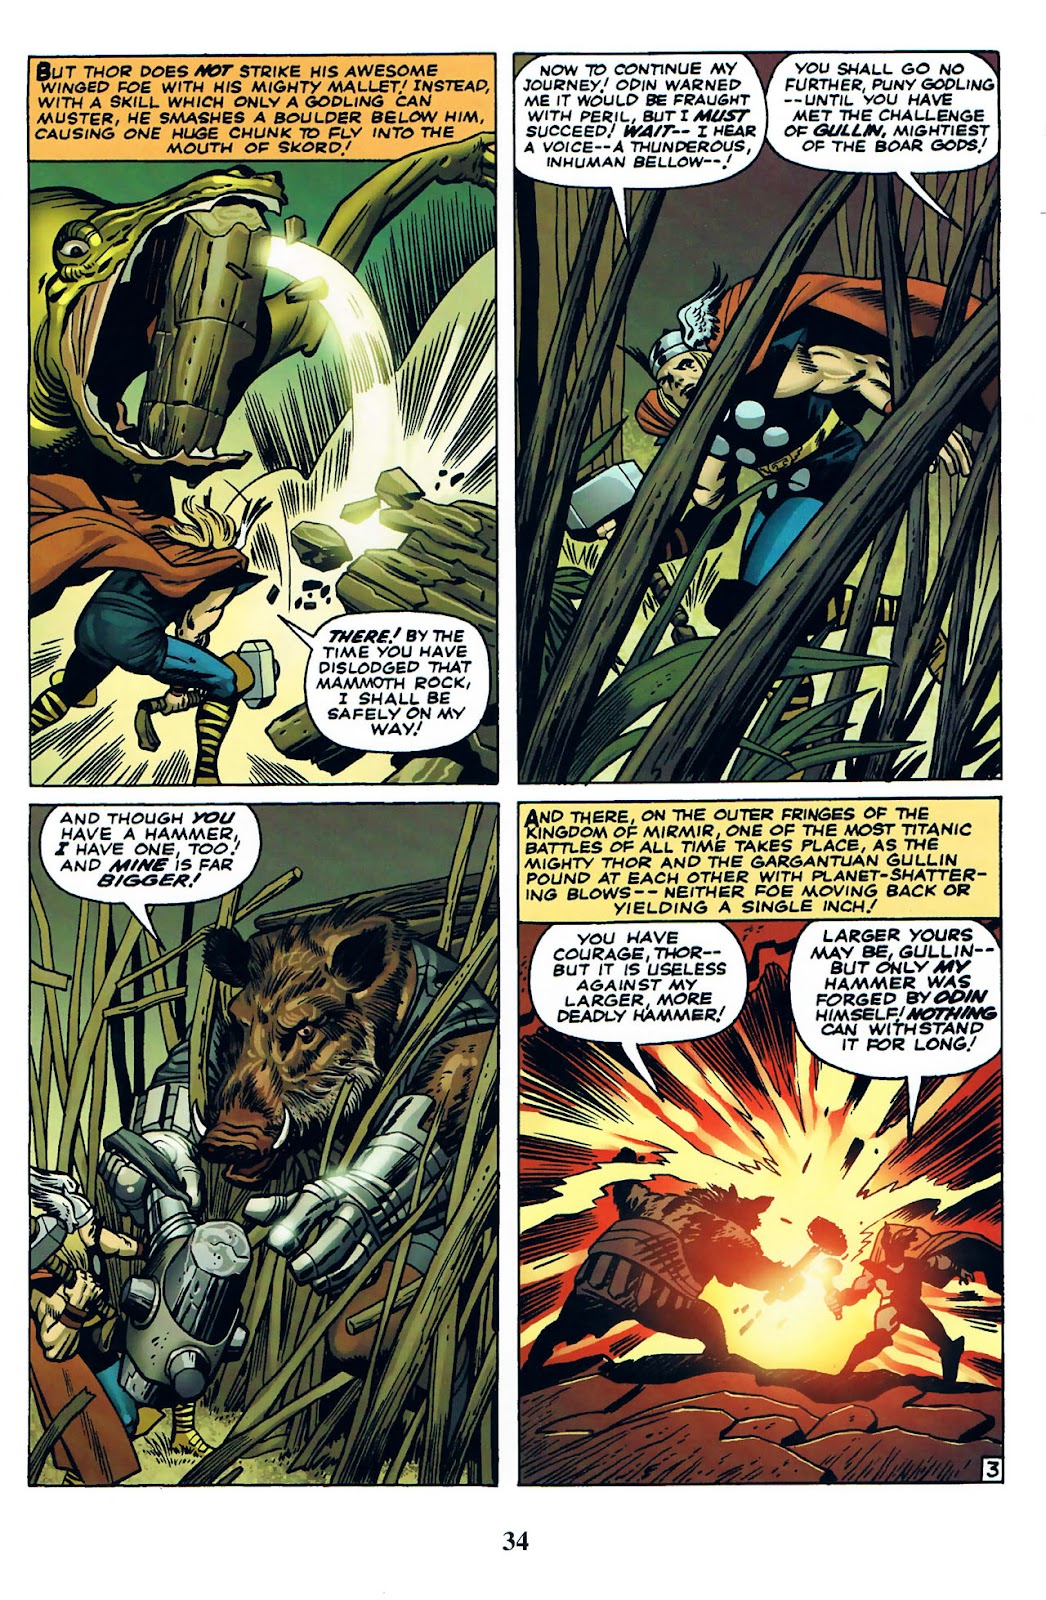 Thor: Tales of Asgard by Stan Lee & Jack Kirby issue 1 - Page 36